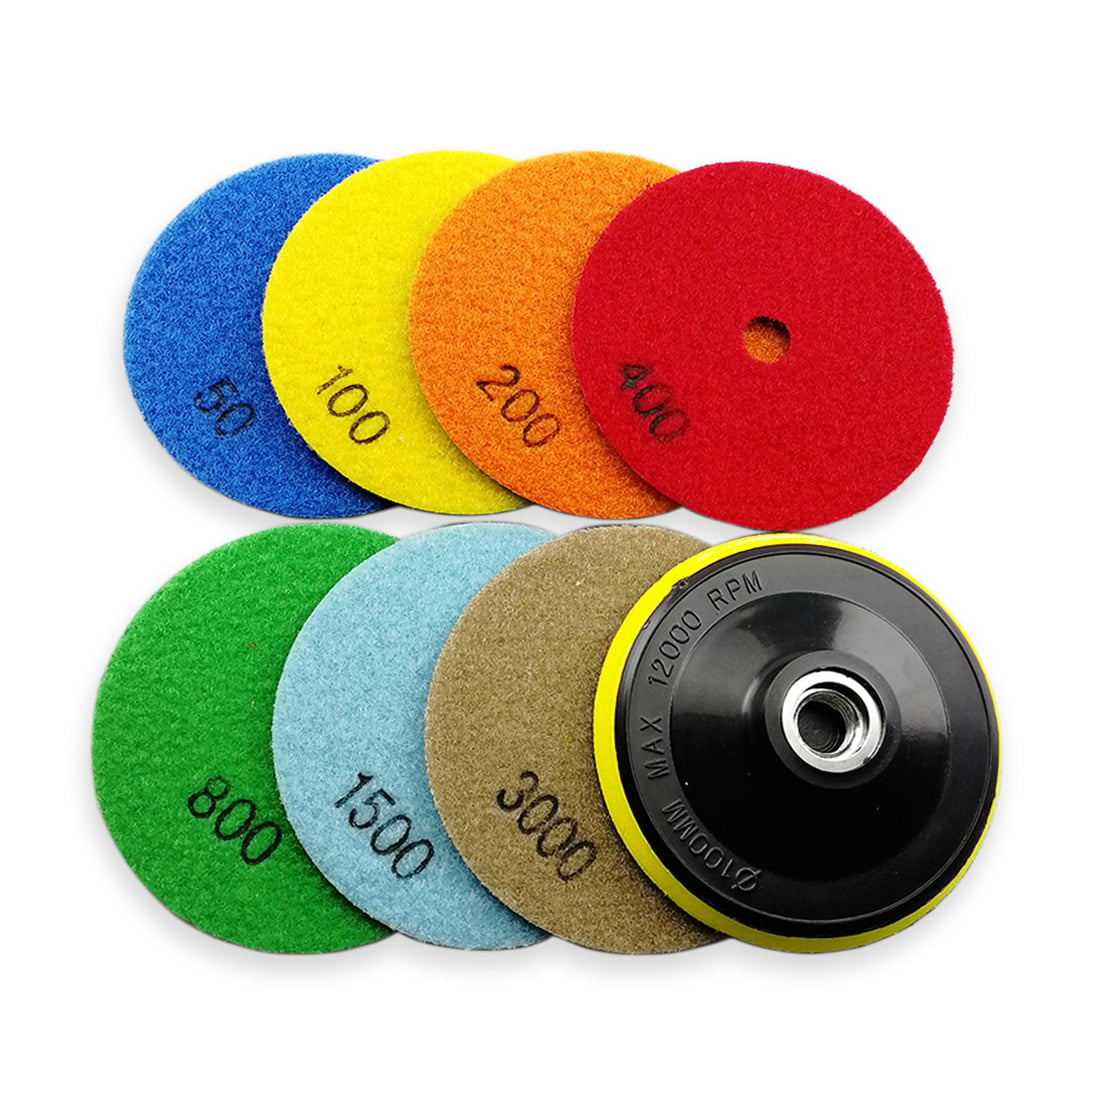 SHDIATOOL Dry Diamond Polishing Pads 4 Inch Set of 7 Pieces Plus a Rubber Backer for Granite Marble Stone